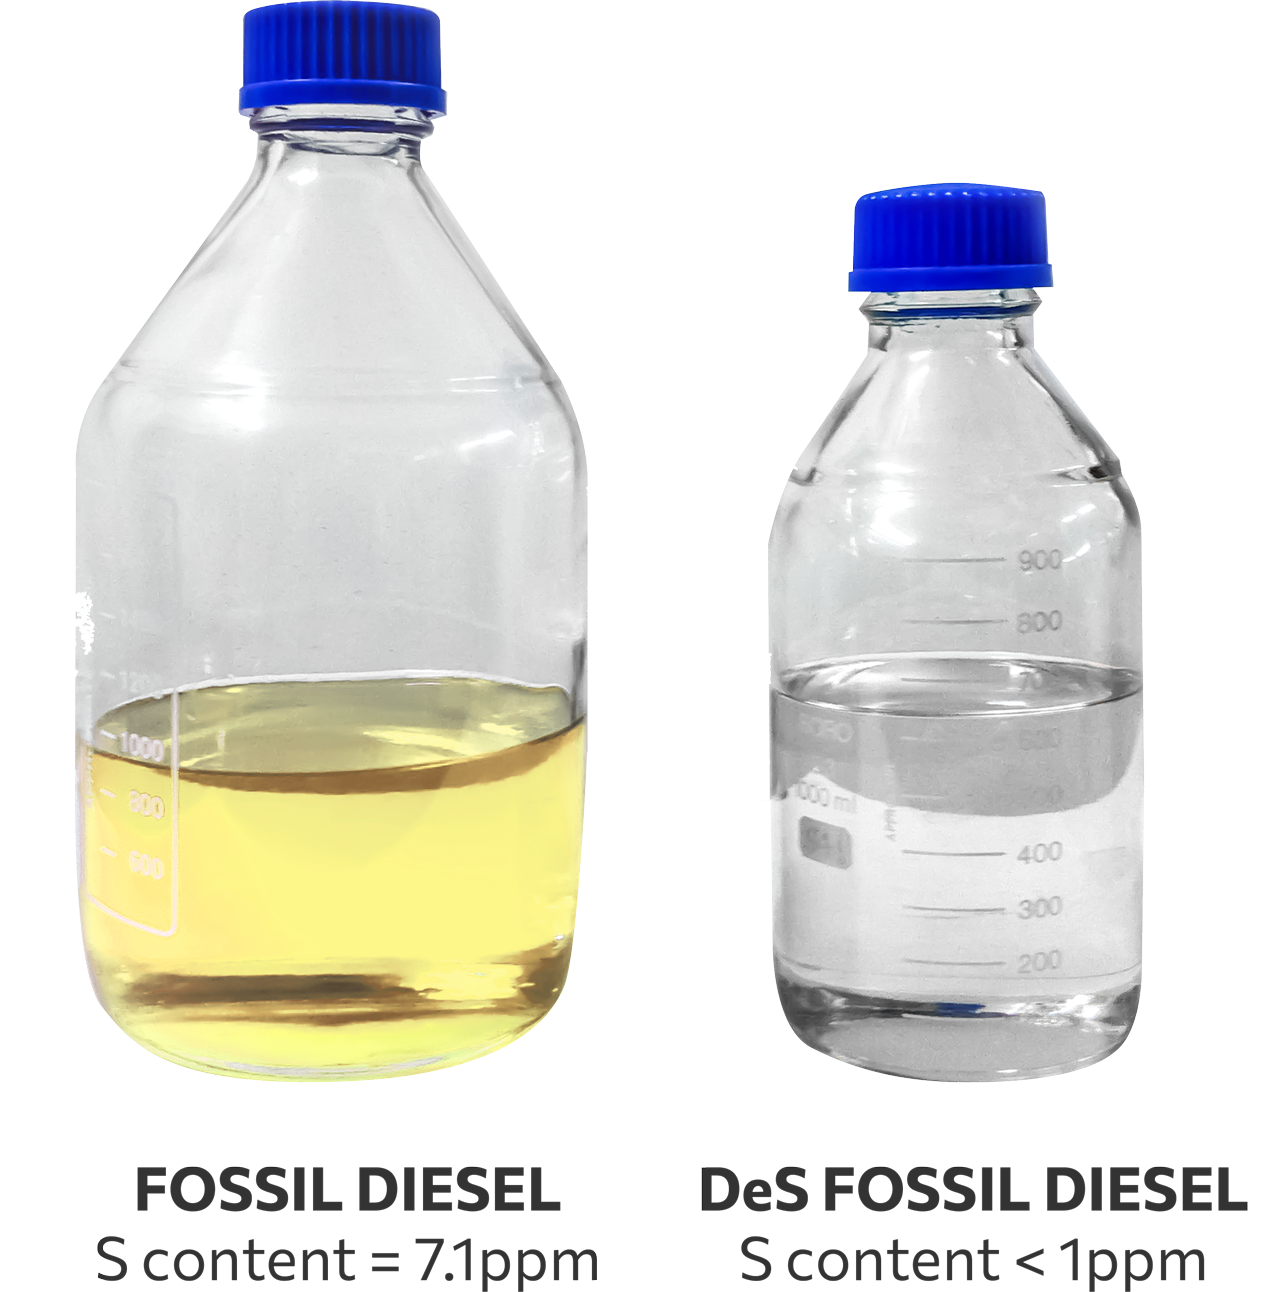 Bottles containing fossil diesel before and after desulfurization